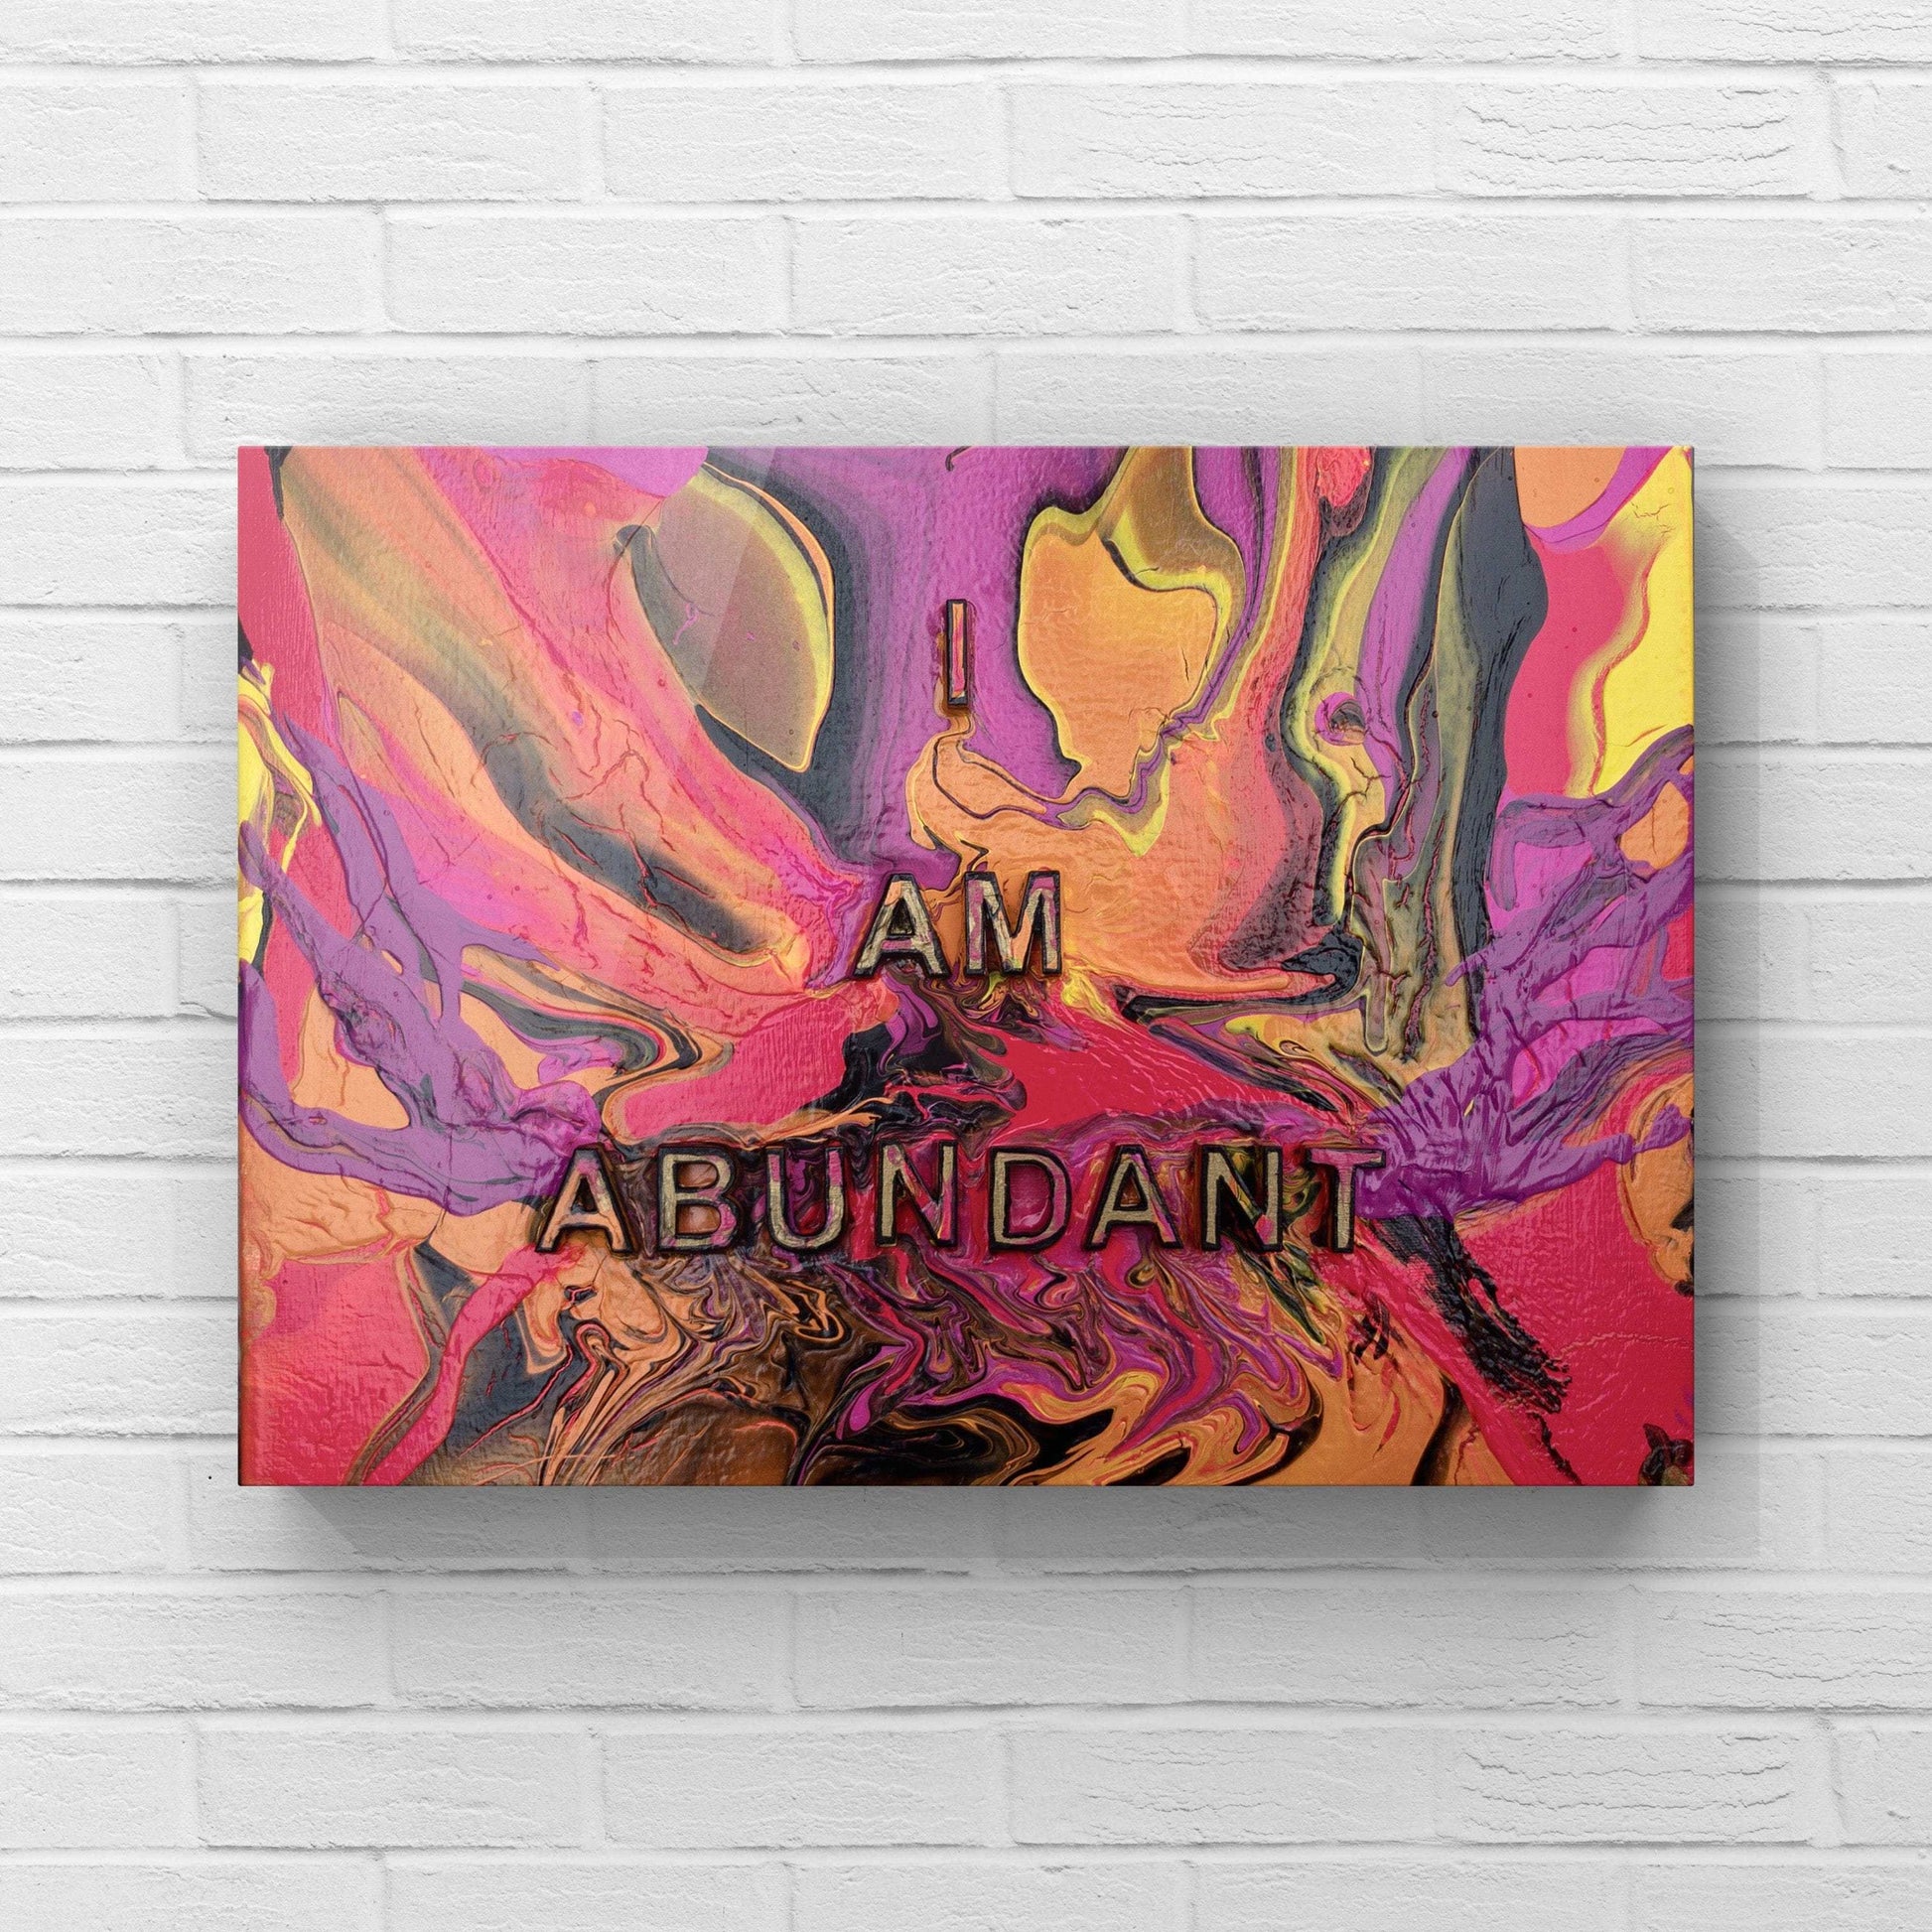 I Am Abundant - Bright Colored, 3D Affirmation Painting, With Wooden Block Letters, Flowing Design, by Art with Evie